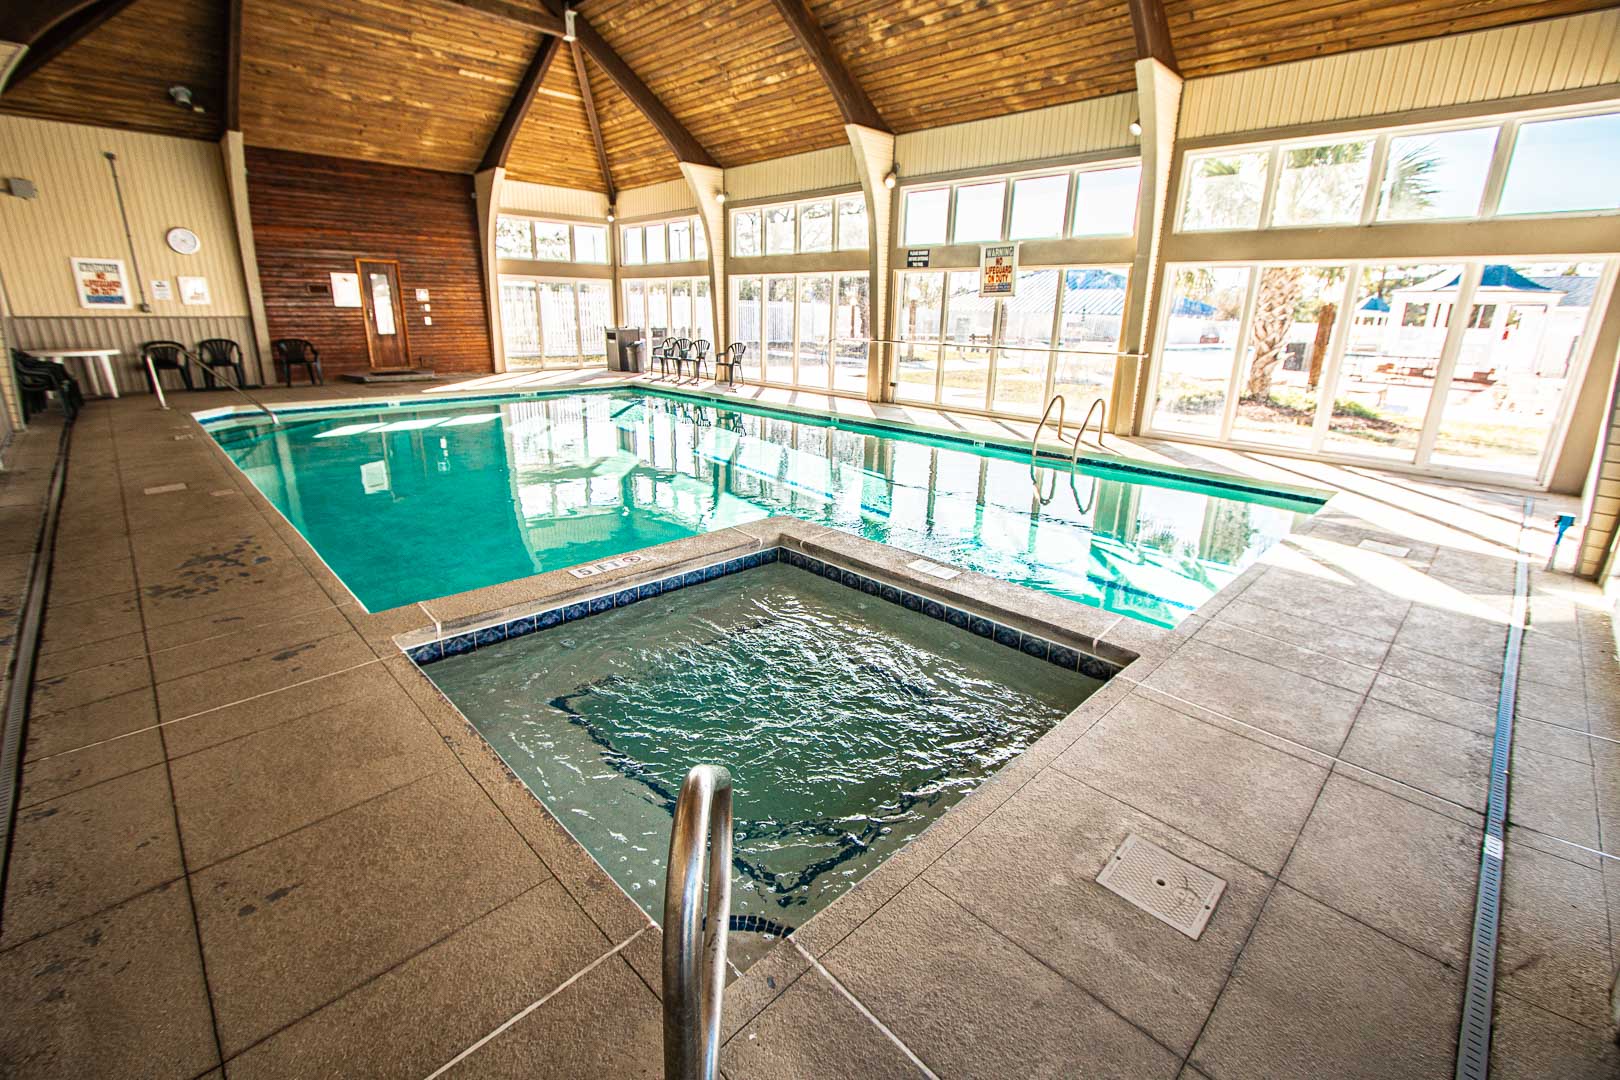 A stoic indoor swimming pool and Jacuzzi tub at VRI's Harbourside II in New Bern, North Carolina.